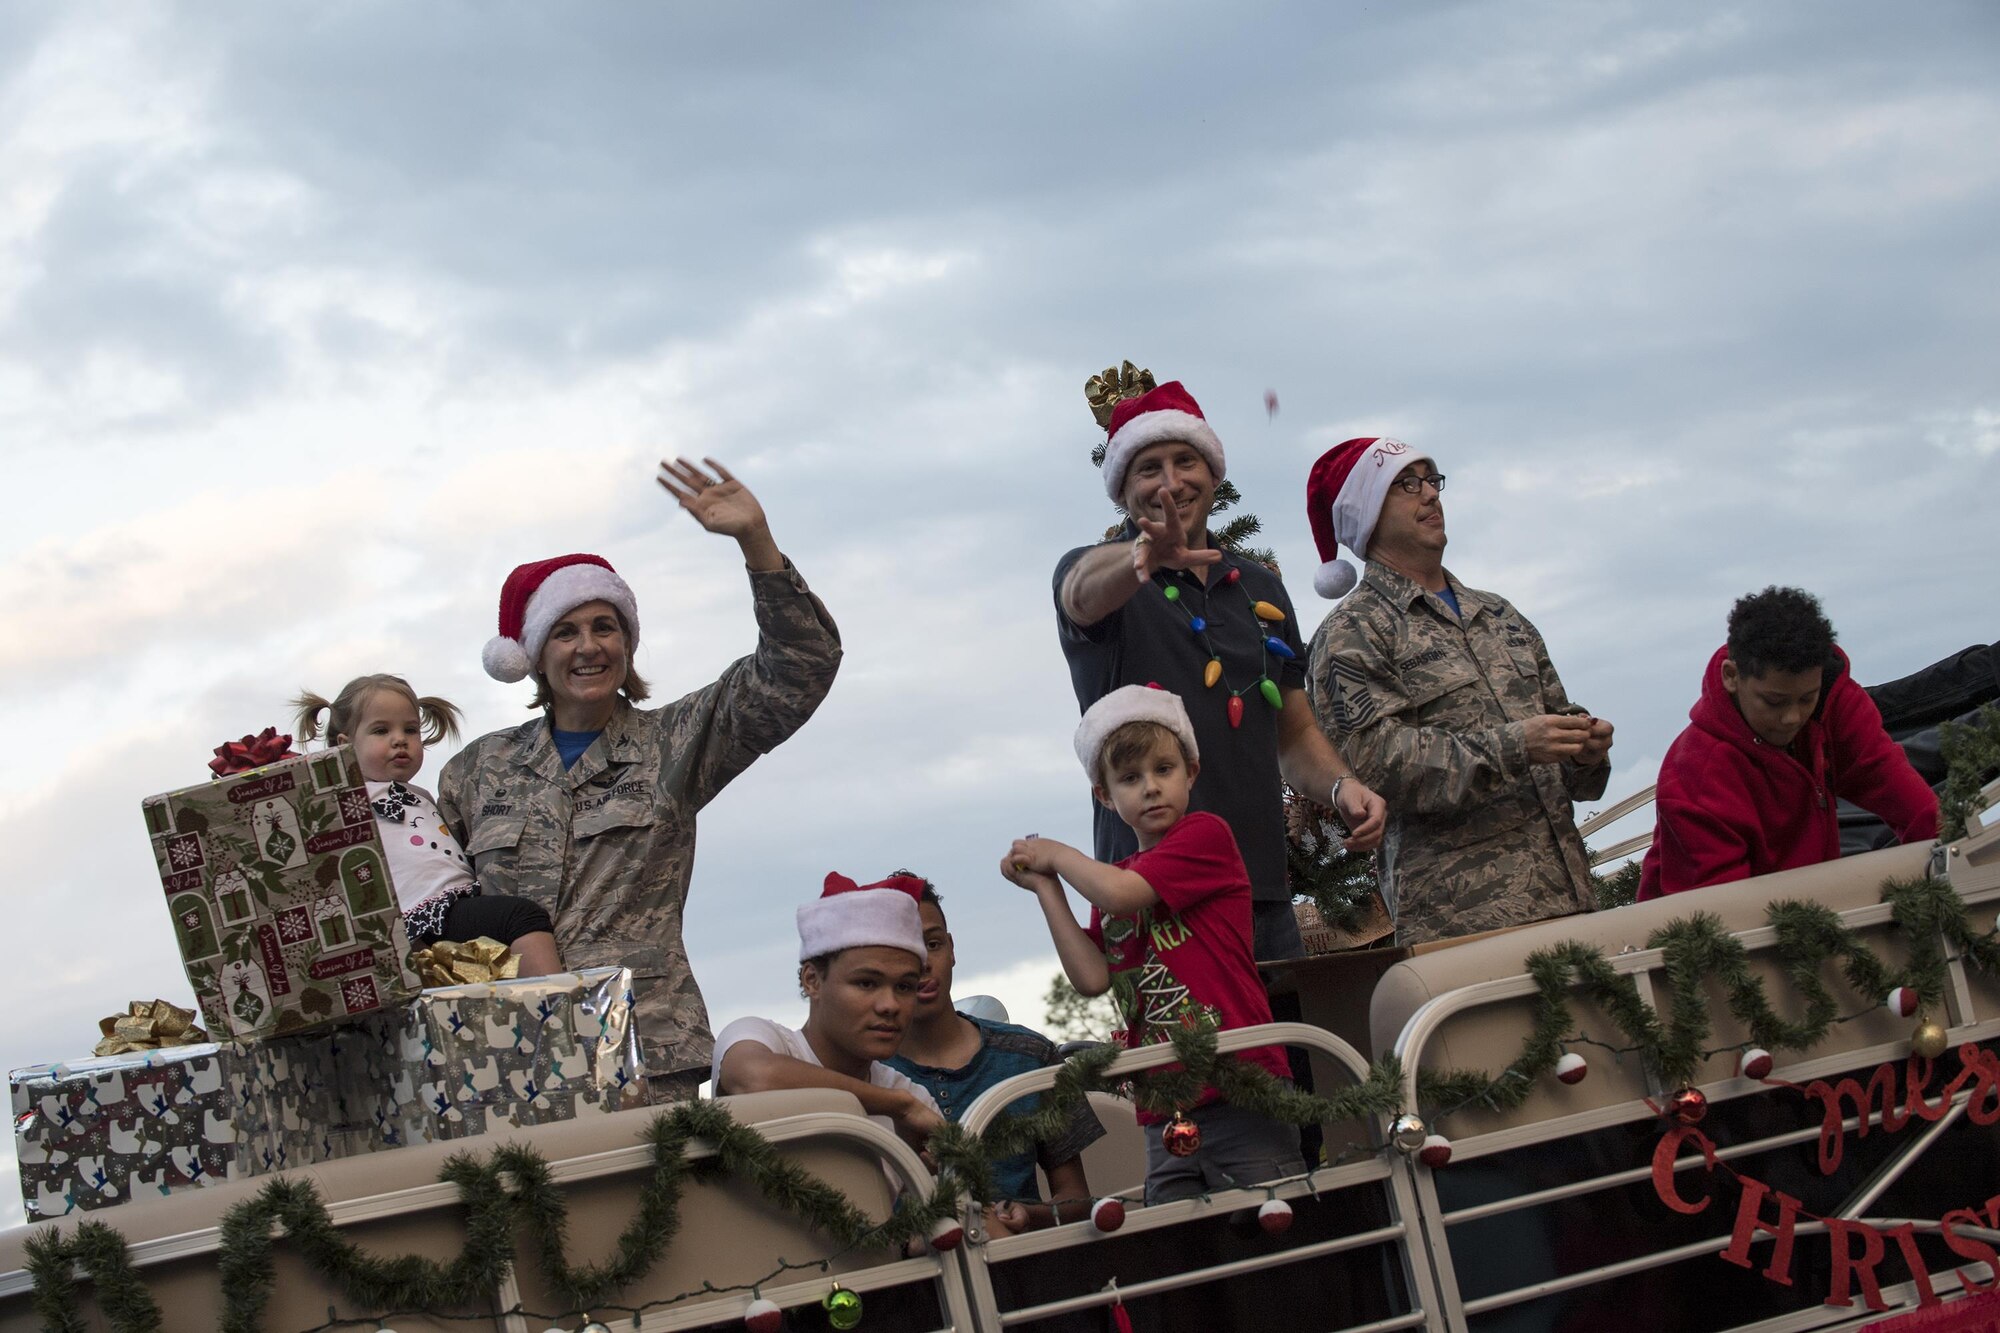 Col. Jennifer Short, 23d Wing commander, Chief Master Sgt. Jarrod Sebastian, 23d Wing command chief, and their families throw candy during a parade at the Tree Lighting Ceremony, Dec. 1, 2017, at Moody Air Force Base, Ga. The annual event brings the base community together as a way to show thanks for their continuous sacrifice and celebrate the holiday season. The celebration included a parade, raffle give-a-ways, children’s activities and traditional lighting of the base Christmas tree by families of deployed Airmen. (U.S. Air Force photo by Andrea Jenkins)